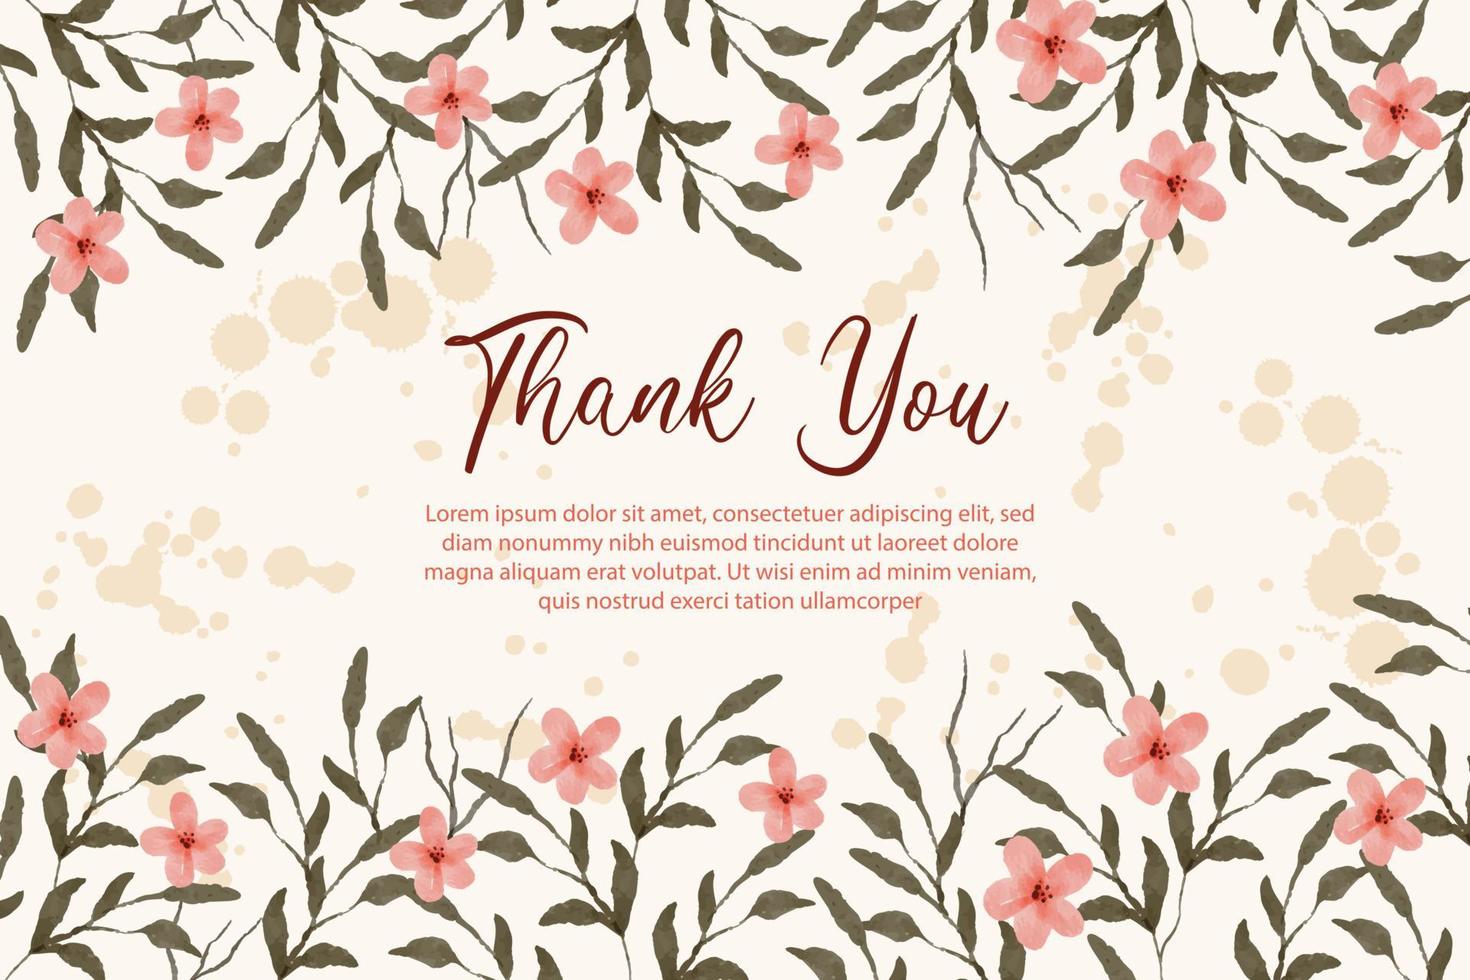 beautiful and elegant floral watercolor background vector